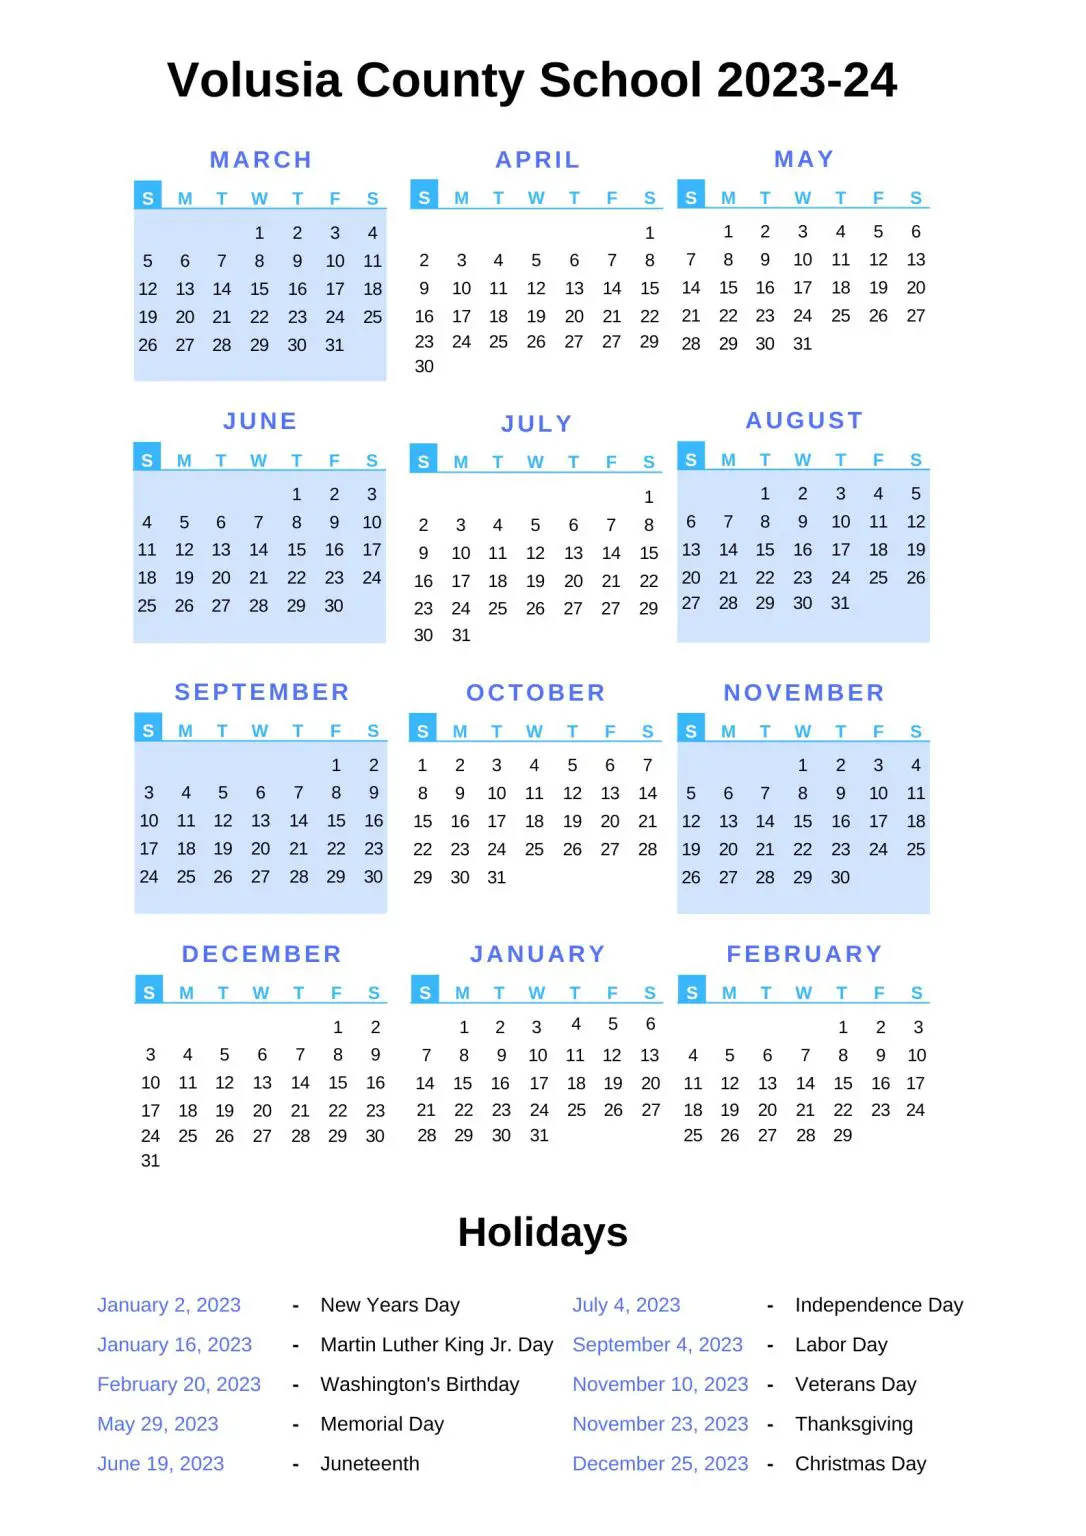 Volusia County School Calendar (20222023) with Holidays